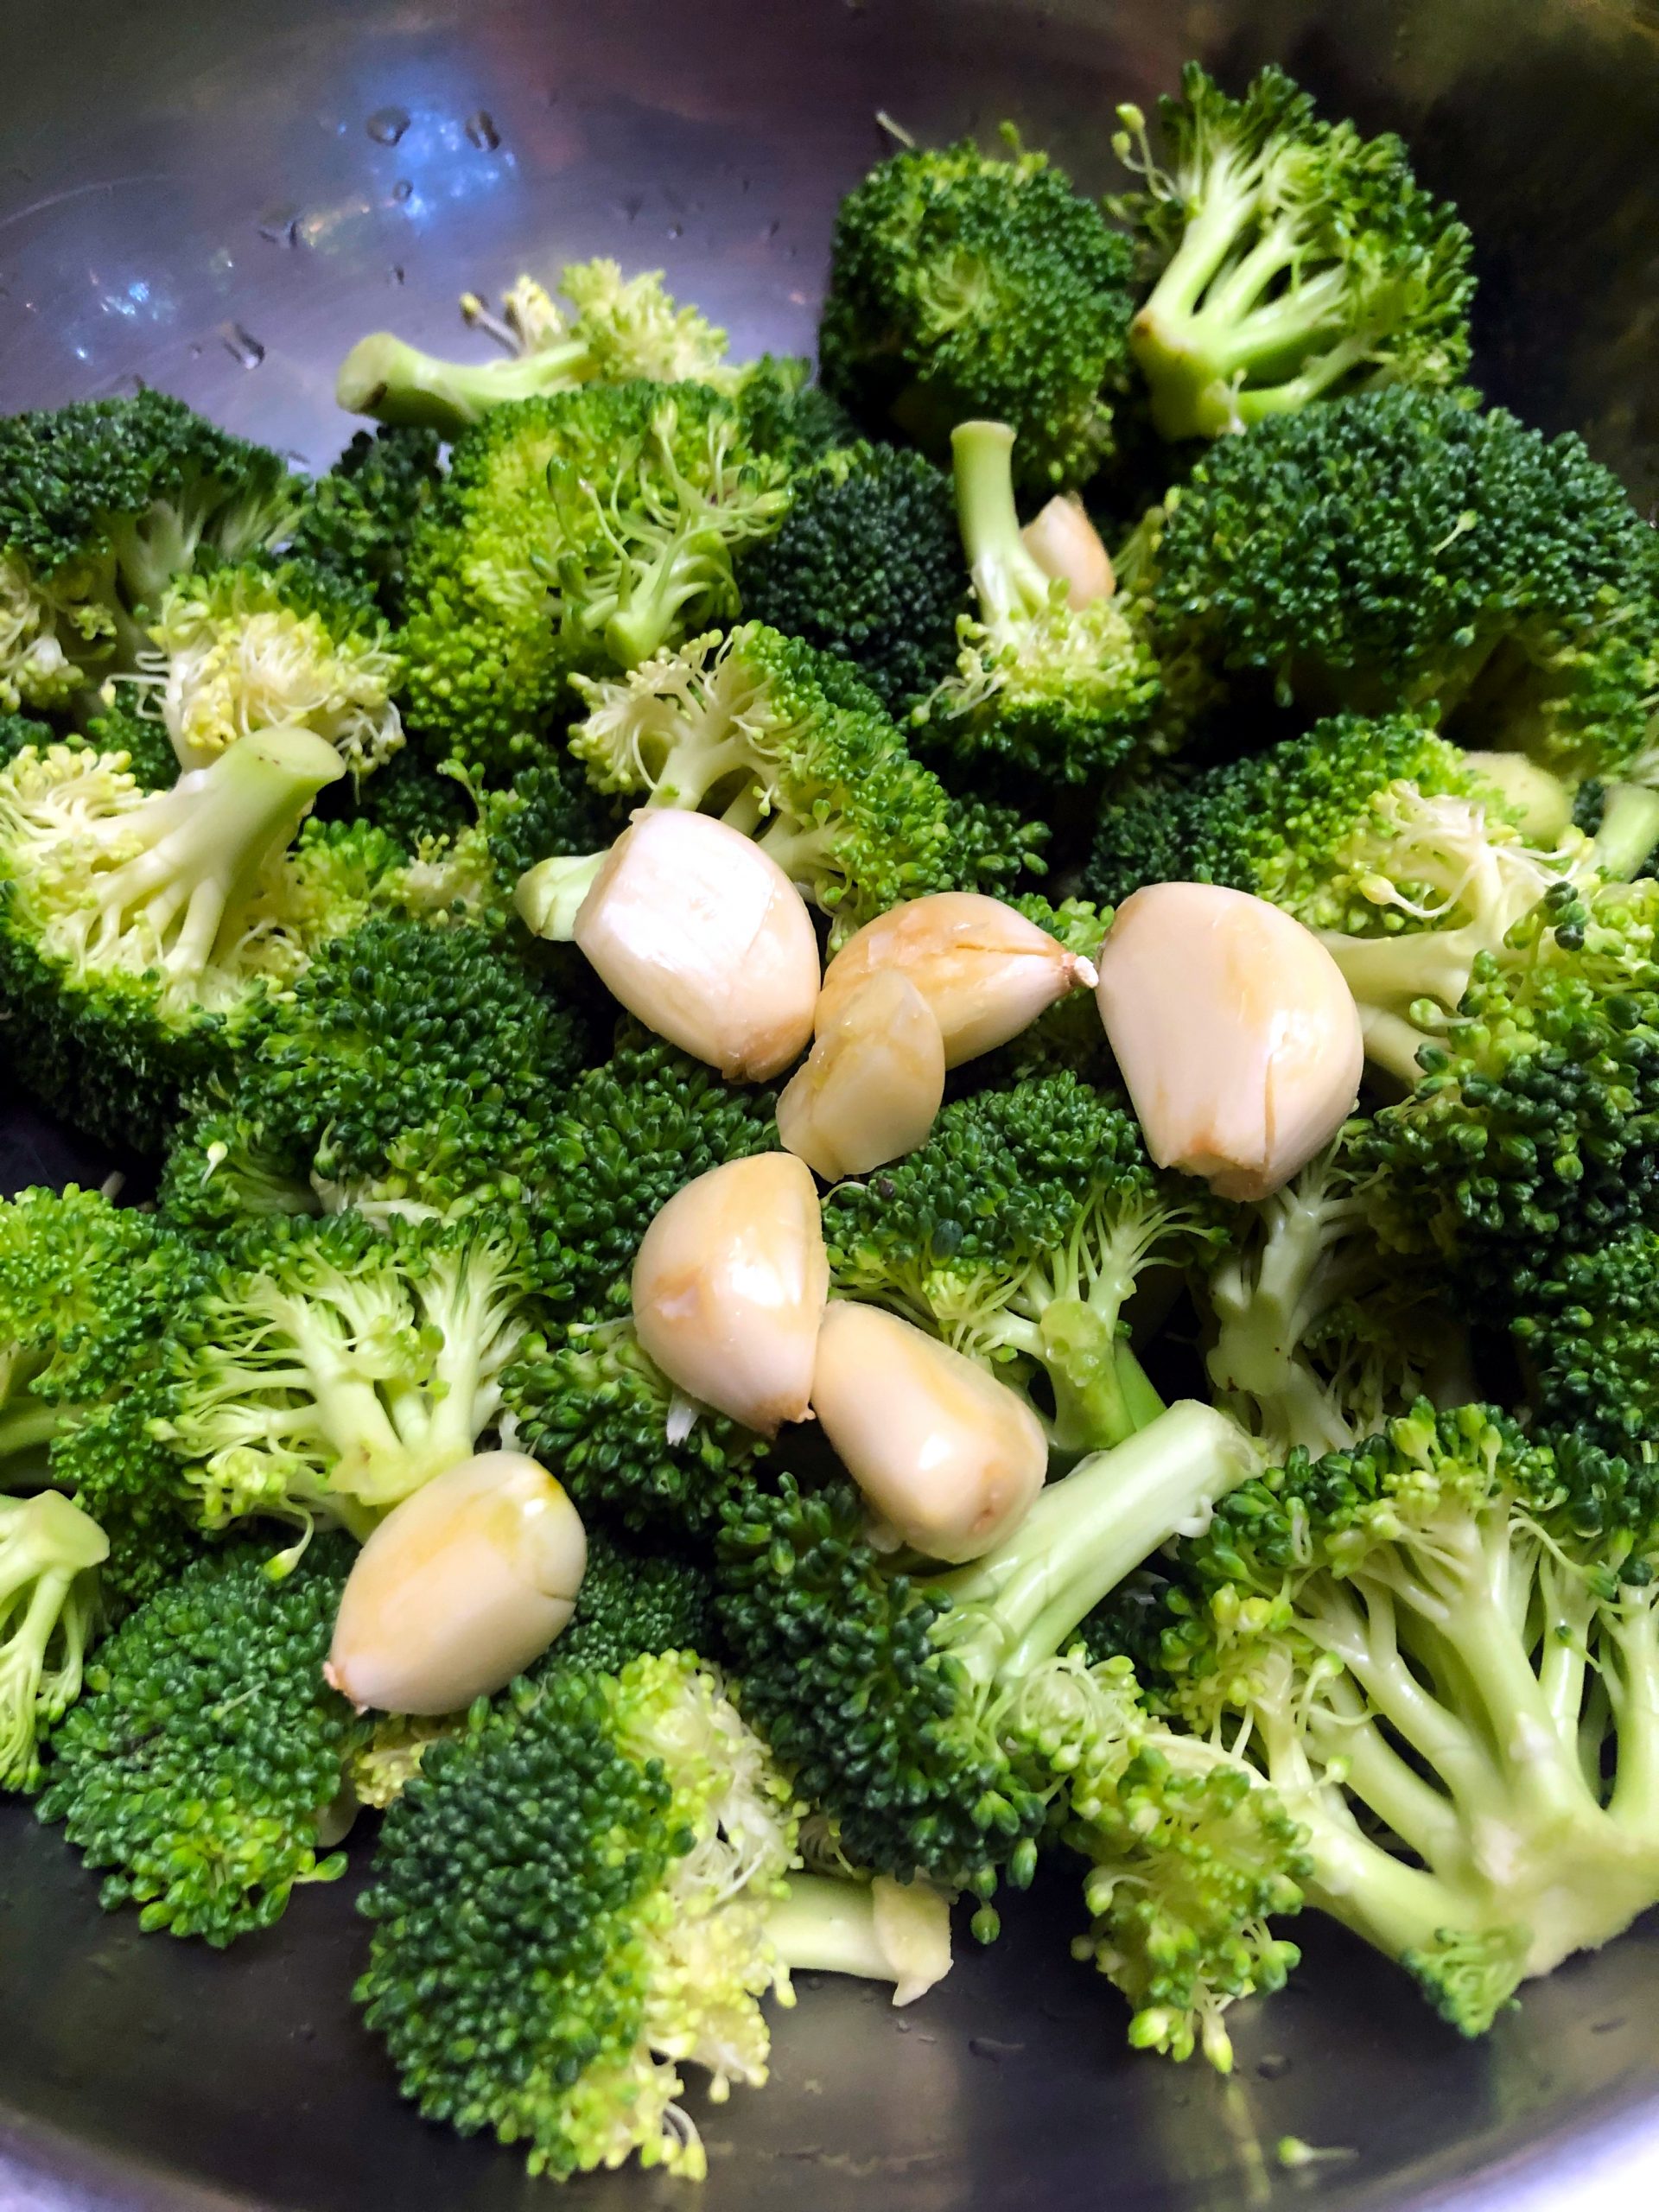 Broccoli Stir Fry with Garlic | Oh Snap! Let's Eat! How Many Cups Is A Pound Of Broccoli